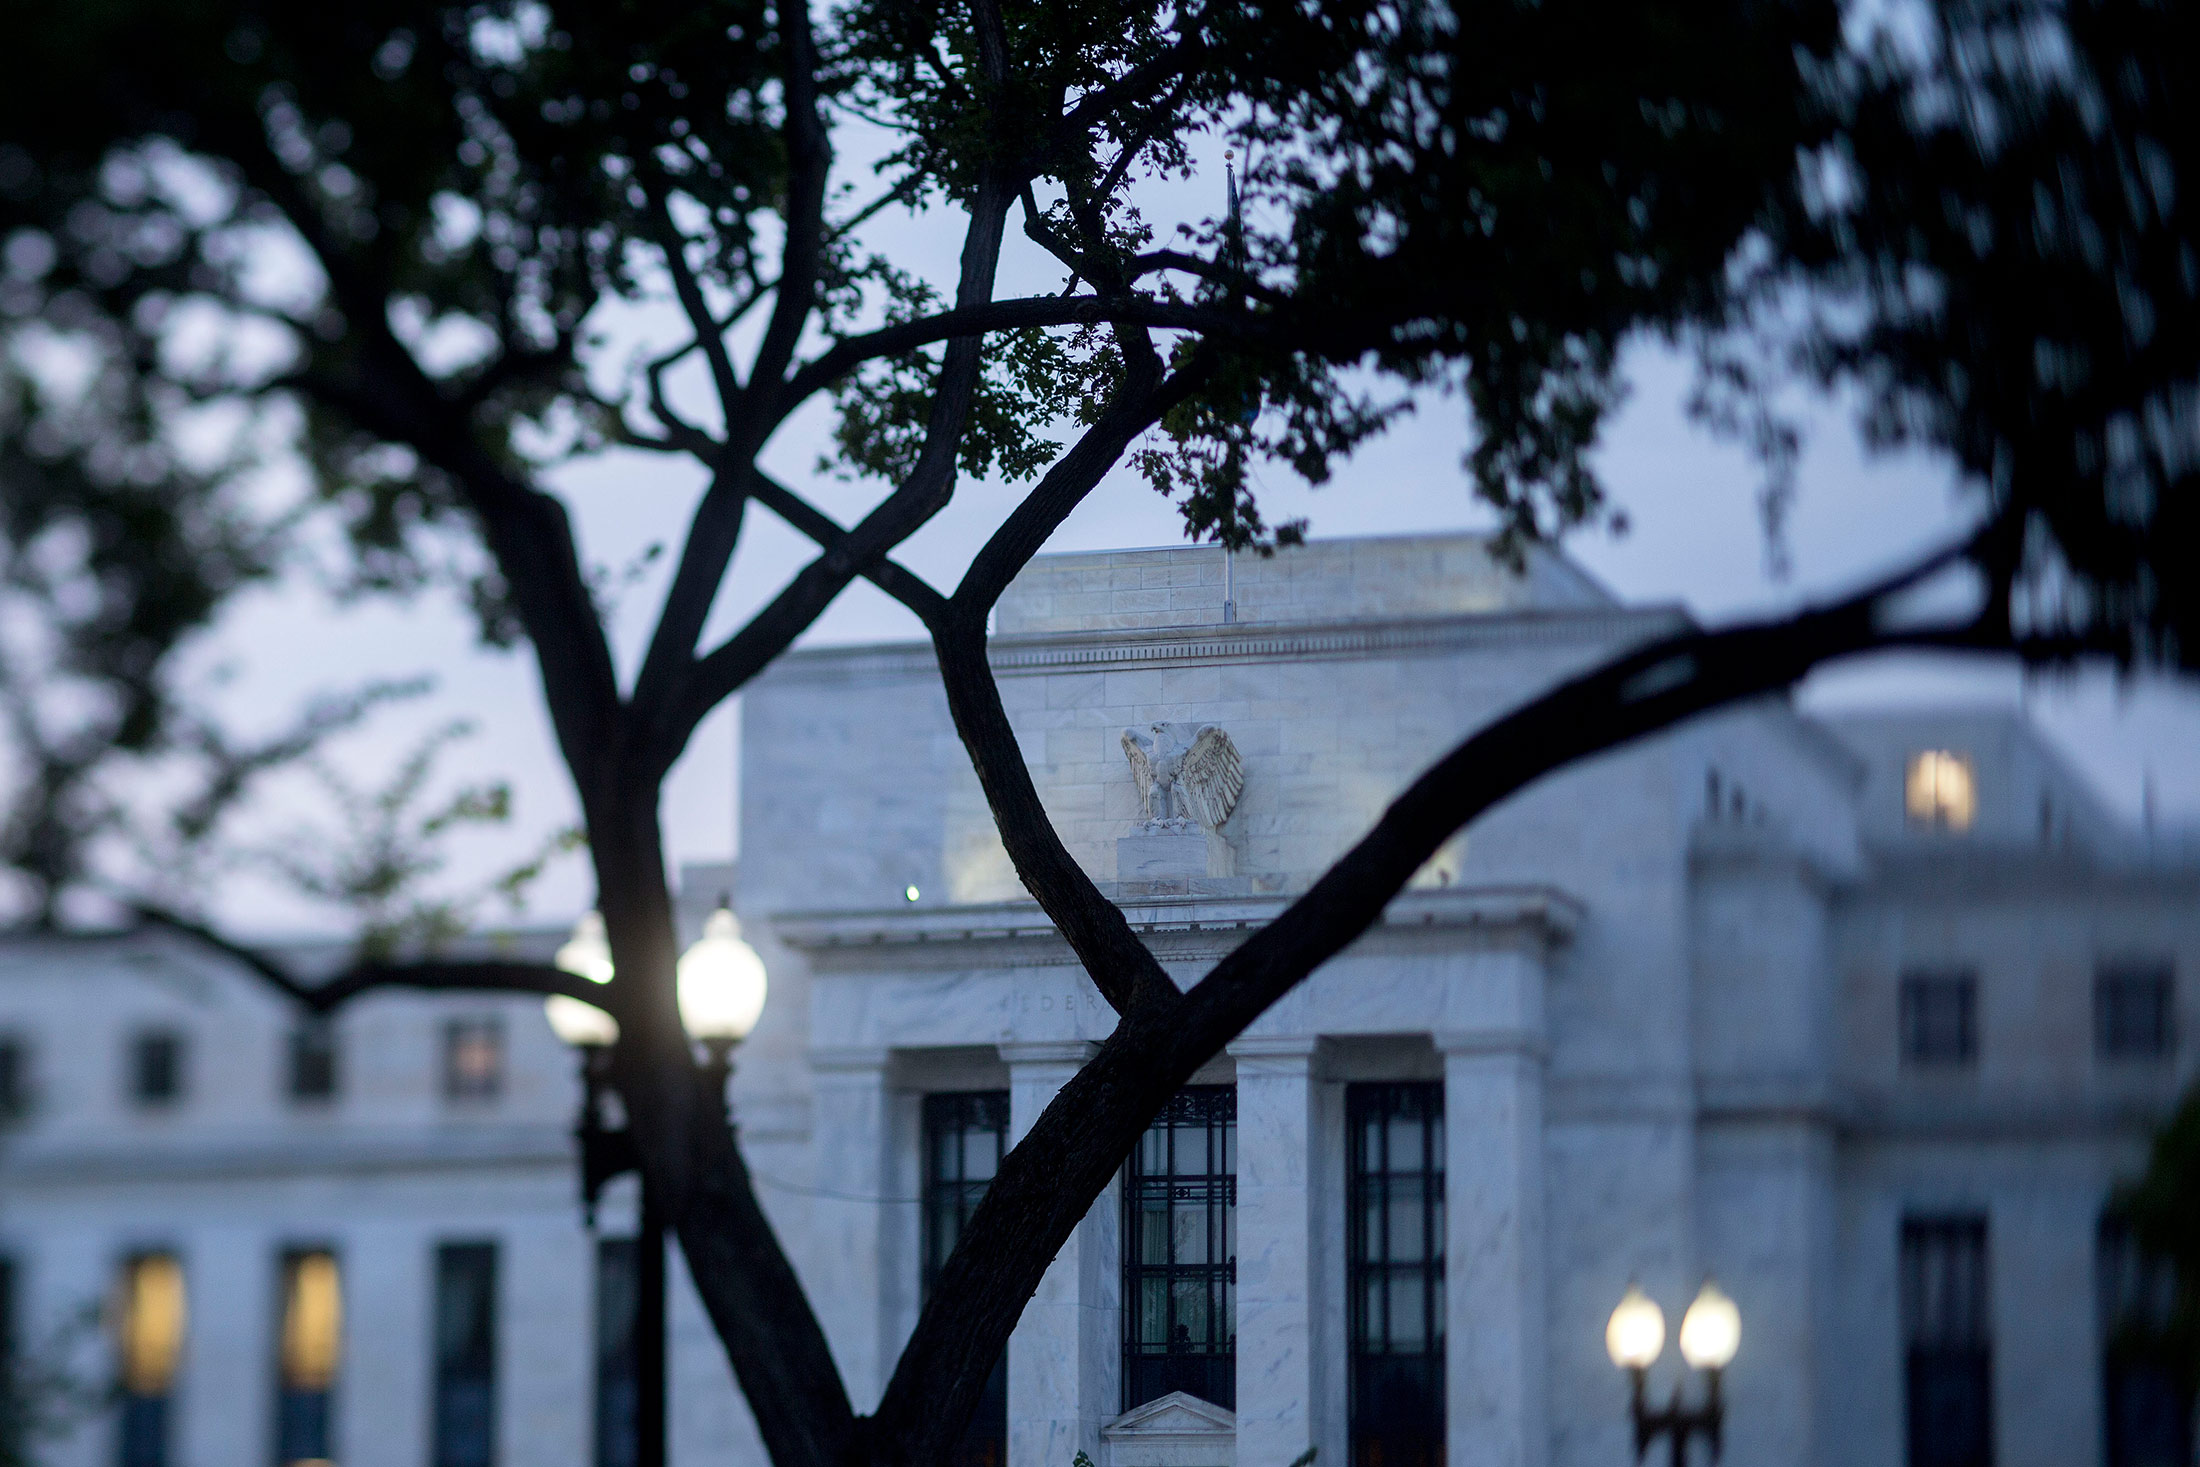 The Marriner S. Eccles Federal Reserve in Washington, D.C., on, Sept. 1, 2015.
